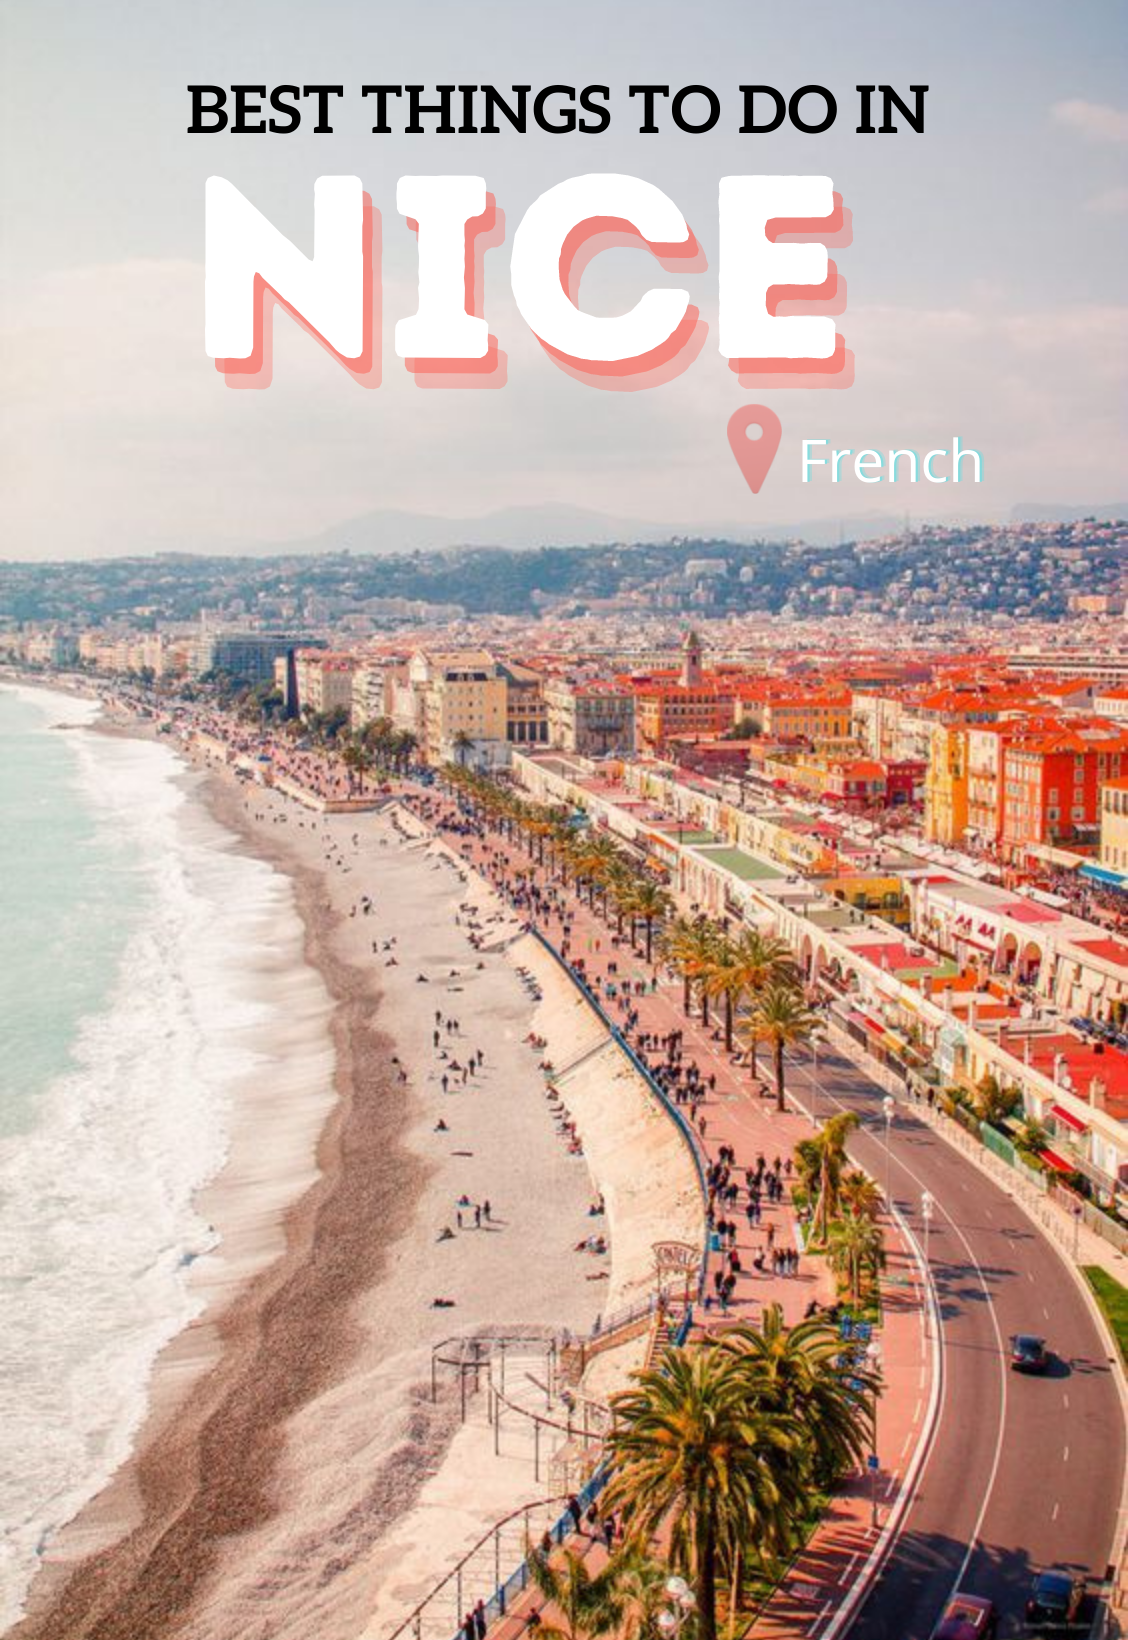 Best things to do in Nice - French